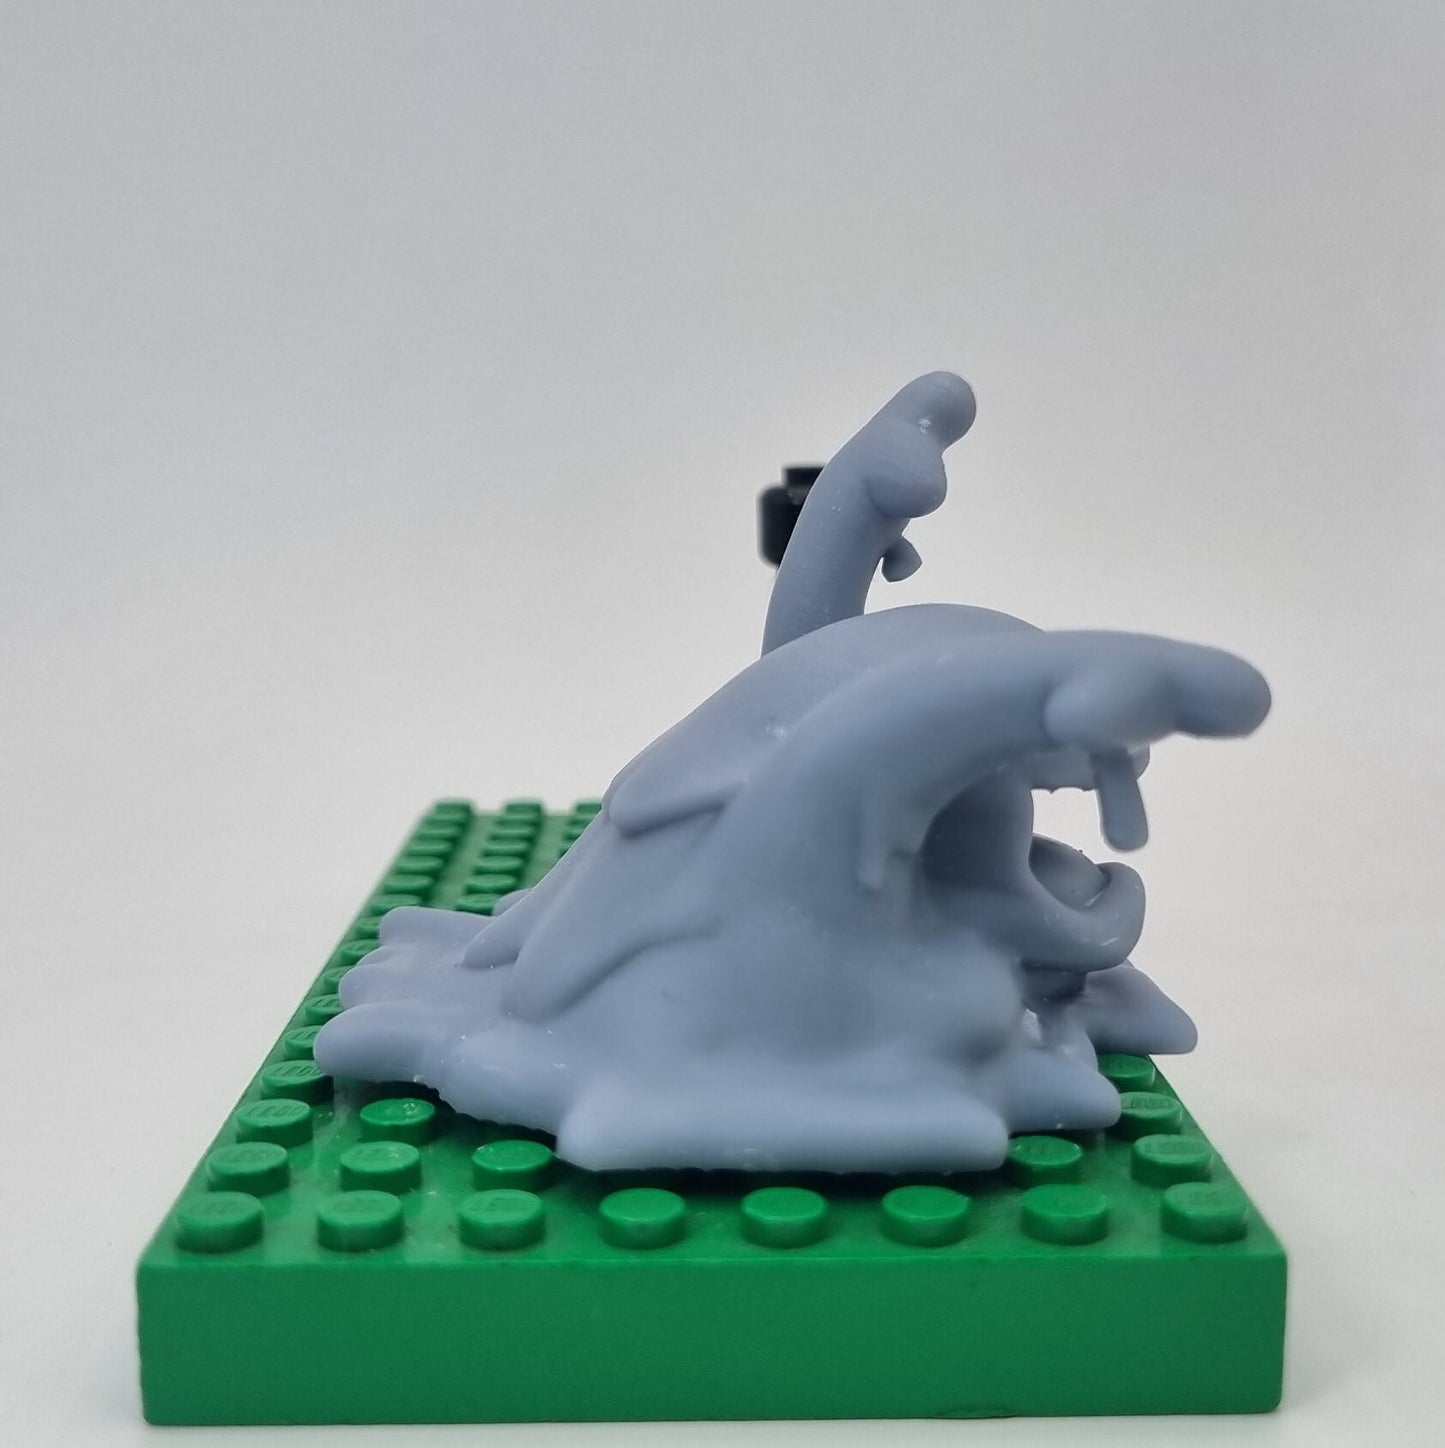 Custom 3D printed building toy slimmy blob animal to catch!